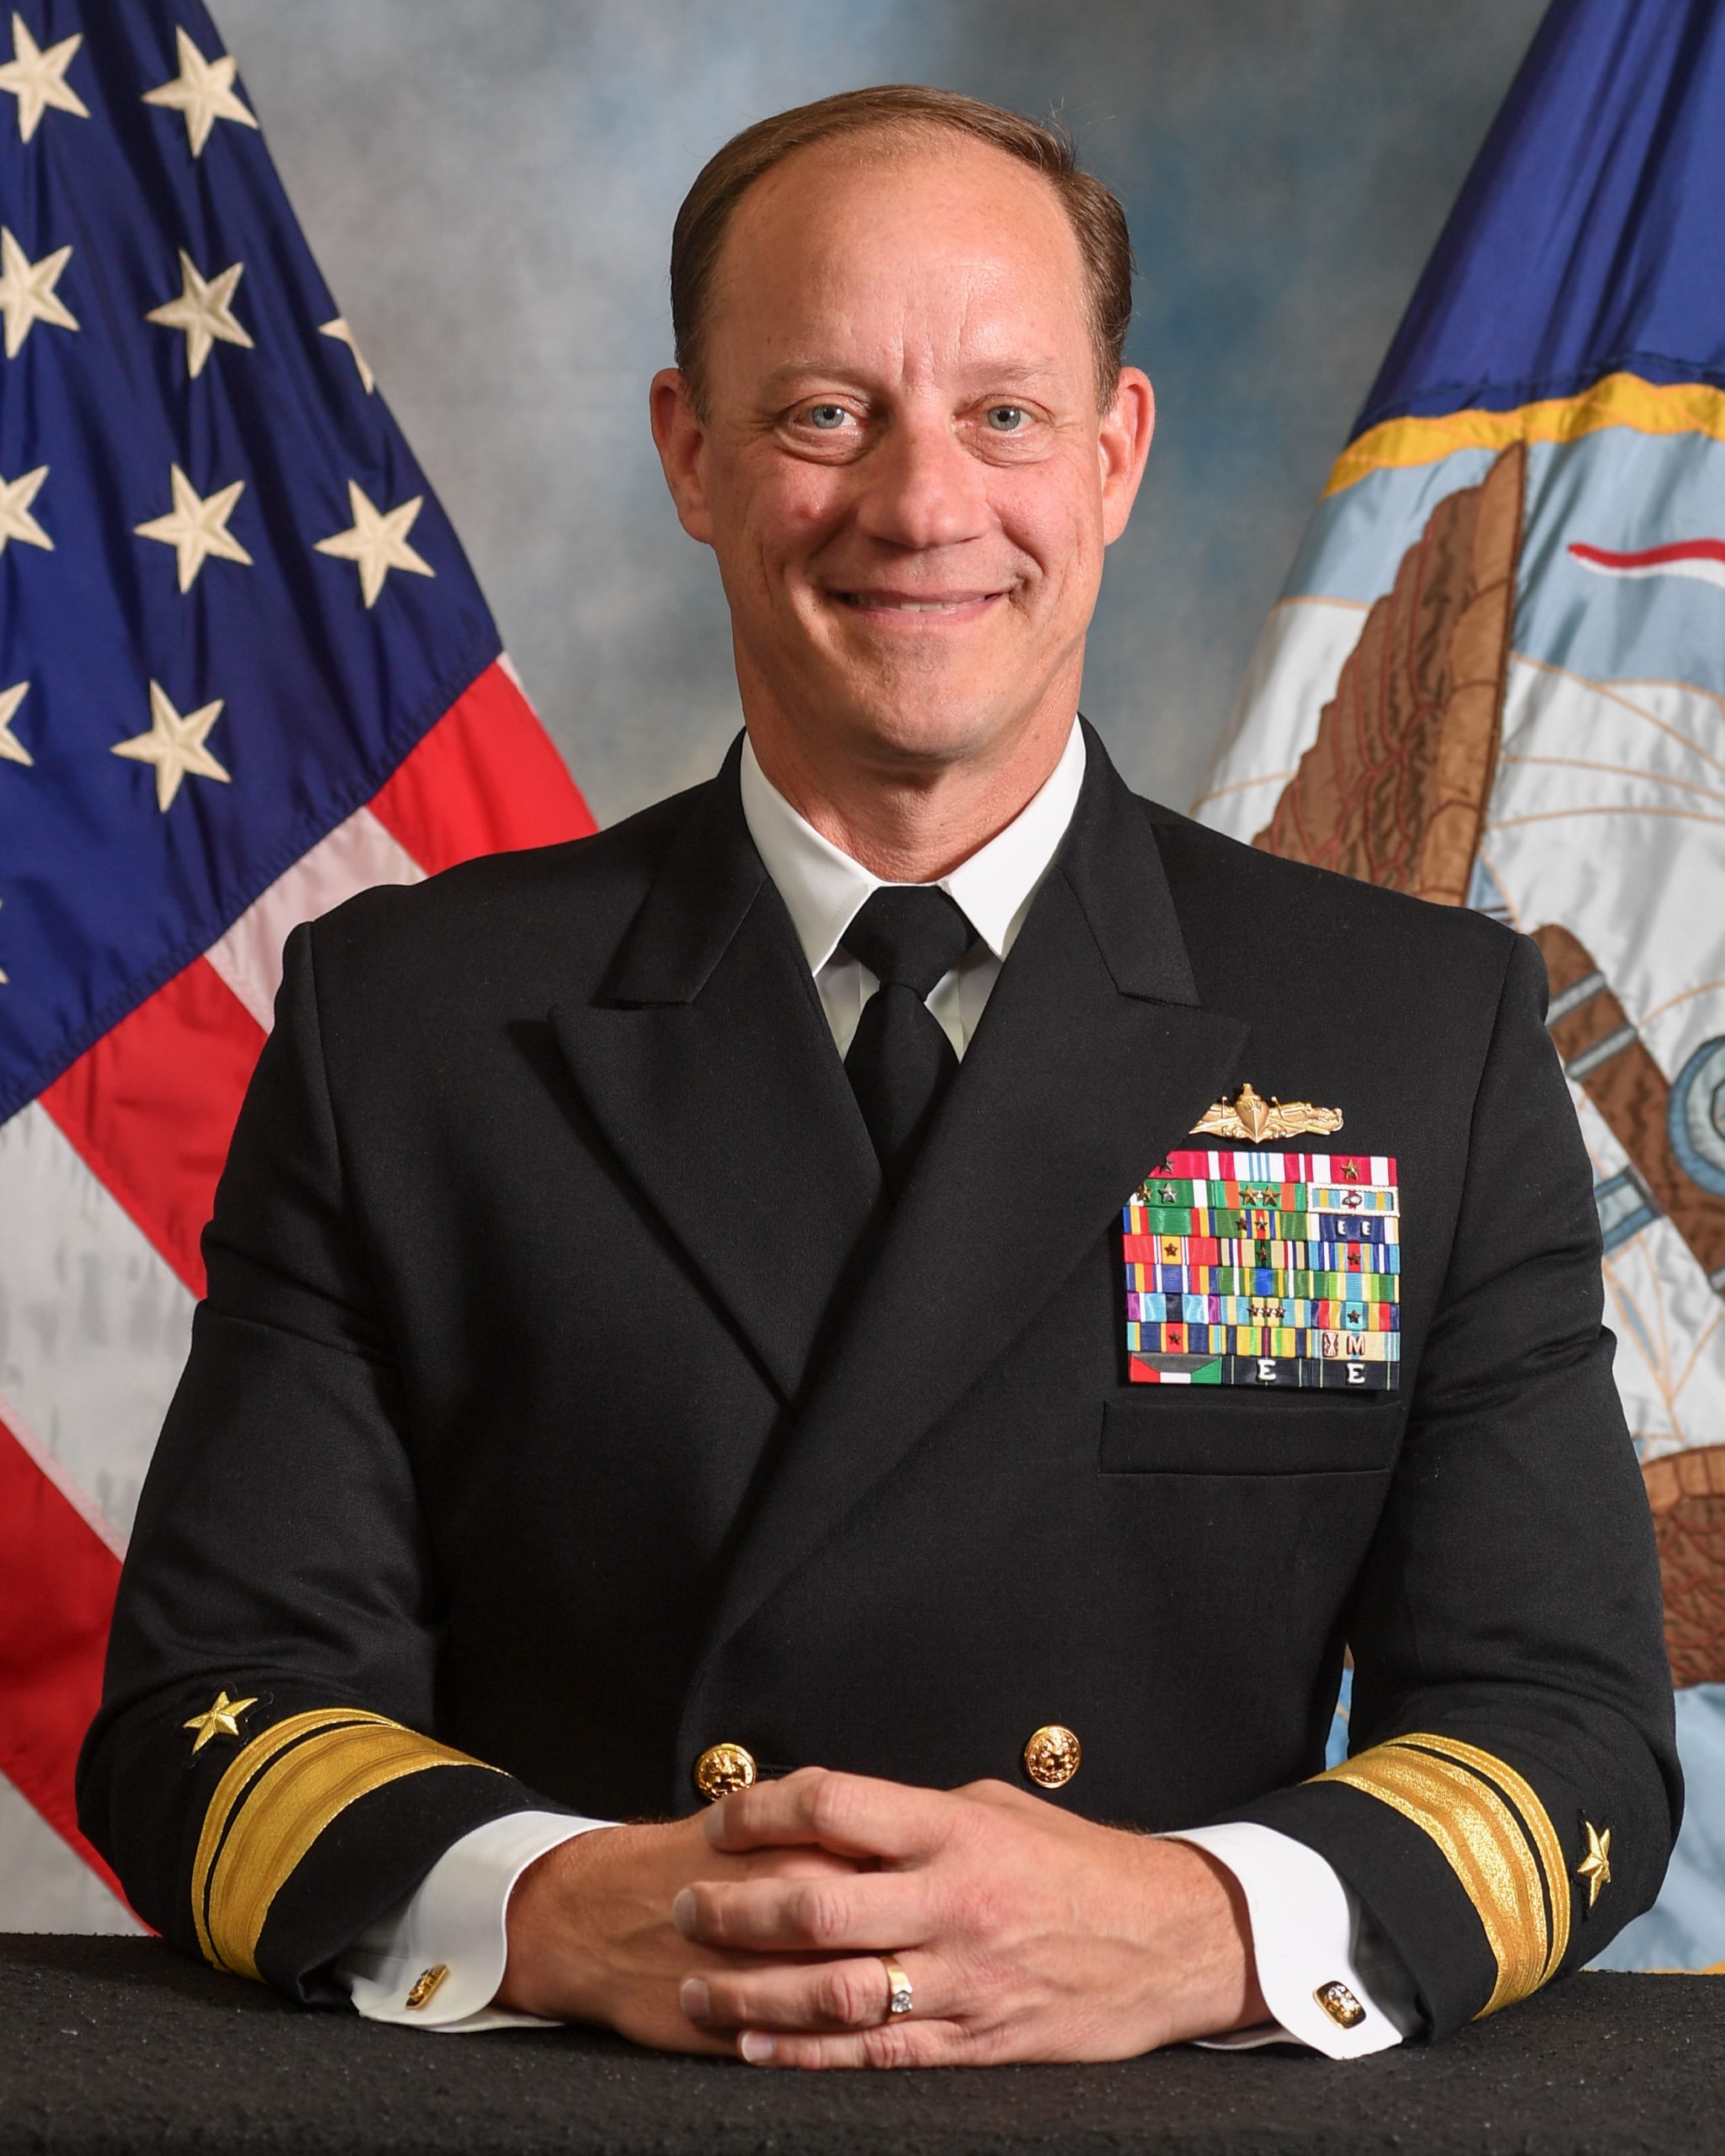 Rear Adm. Robert Nowakowski poses for his official photo. (U.S. Navy photo by Mass Communication Specialist 1st Class Claire DuBois)